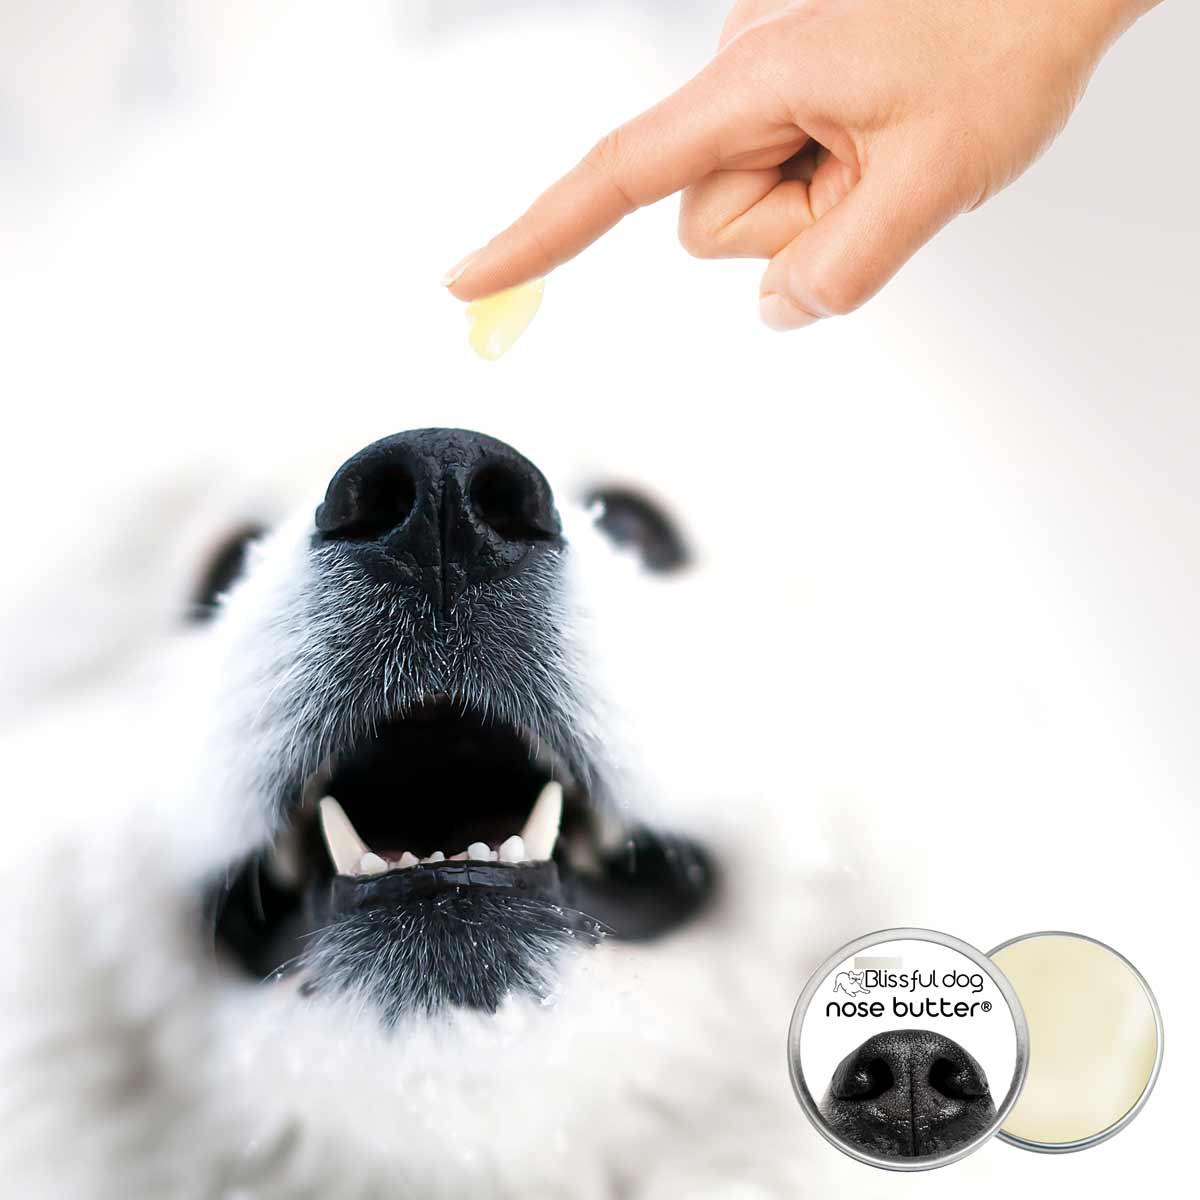 NOSE BUTTER FOR DOGS